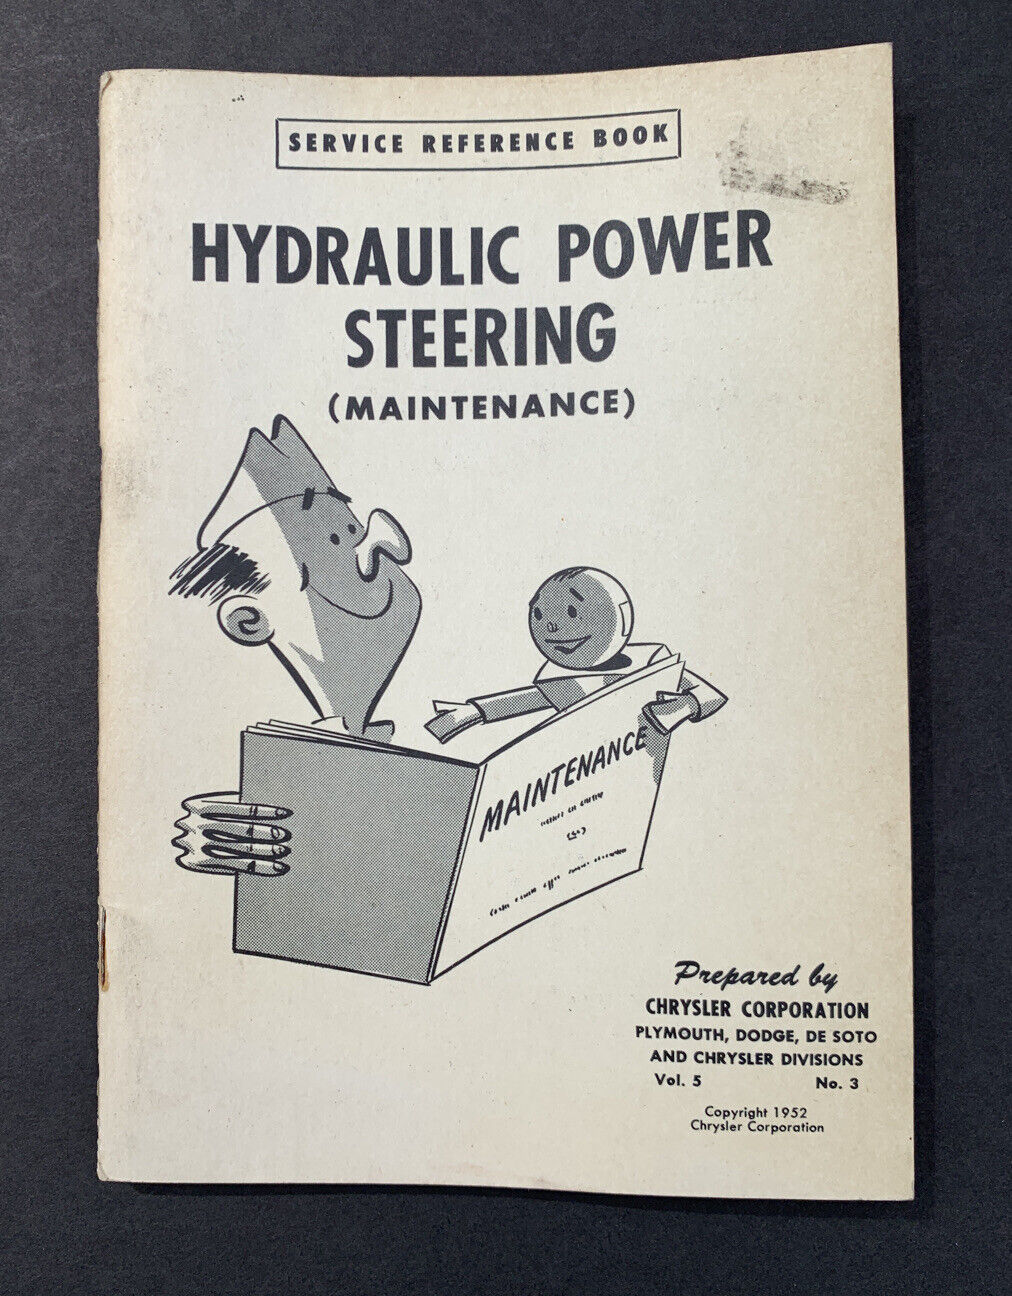 1952 Chrysler Service Reference Book - Hydraulic Power Steering Maintenance